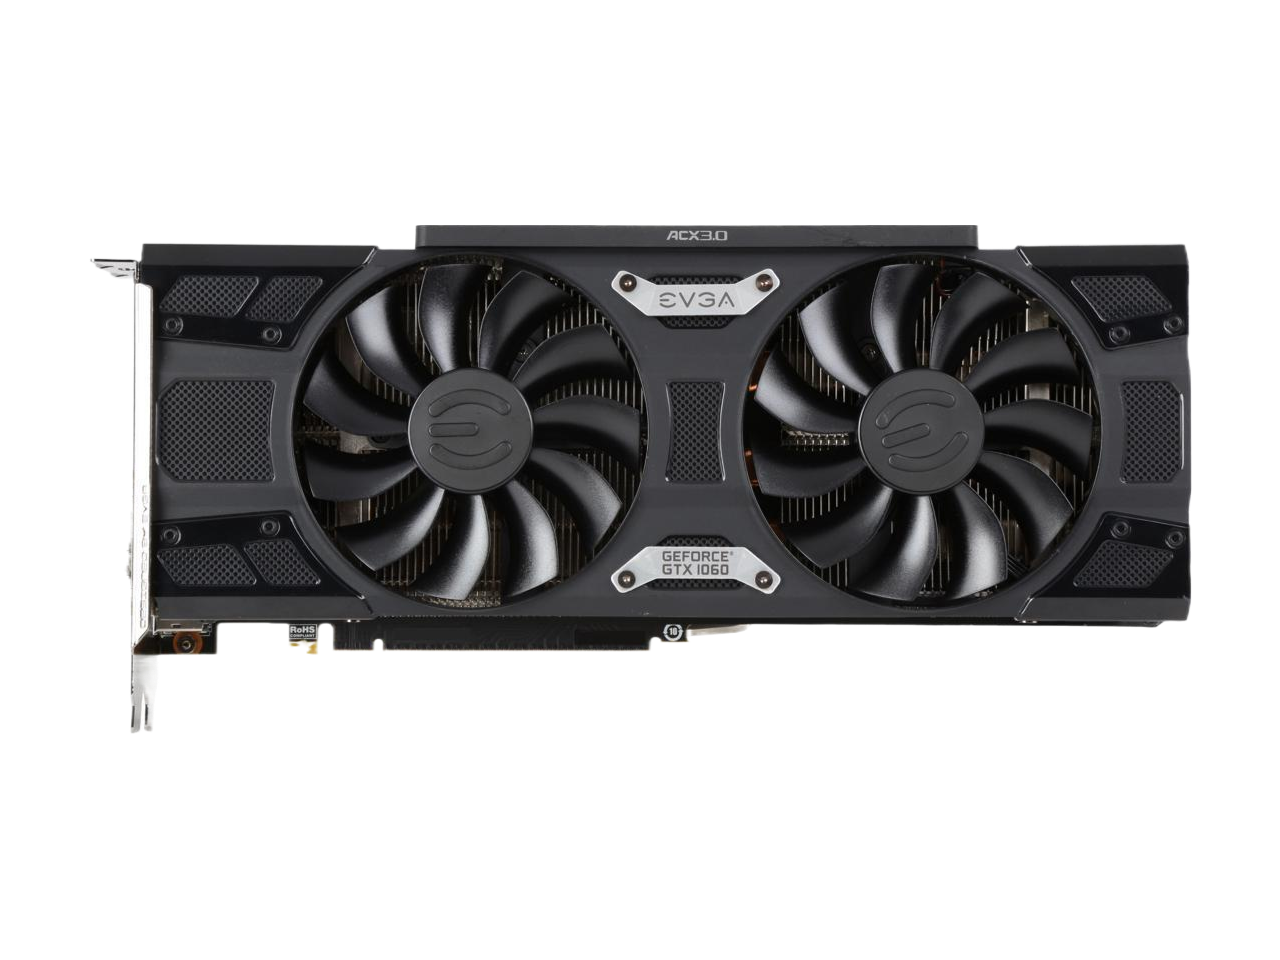 EVGA GeForce GTX 1060 6GB SSC GAMING ACX 3.0, 6GB GDDR5 LED DX12 OSD Support (PXOC) Graphics Card 06G-P4-6267-RX